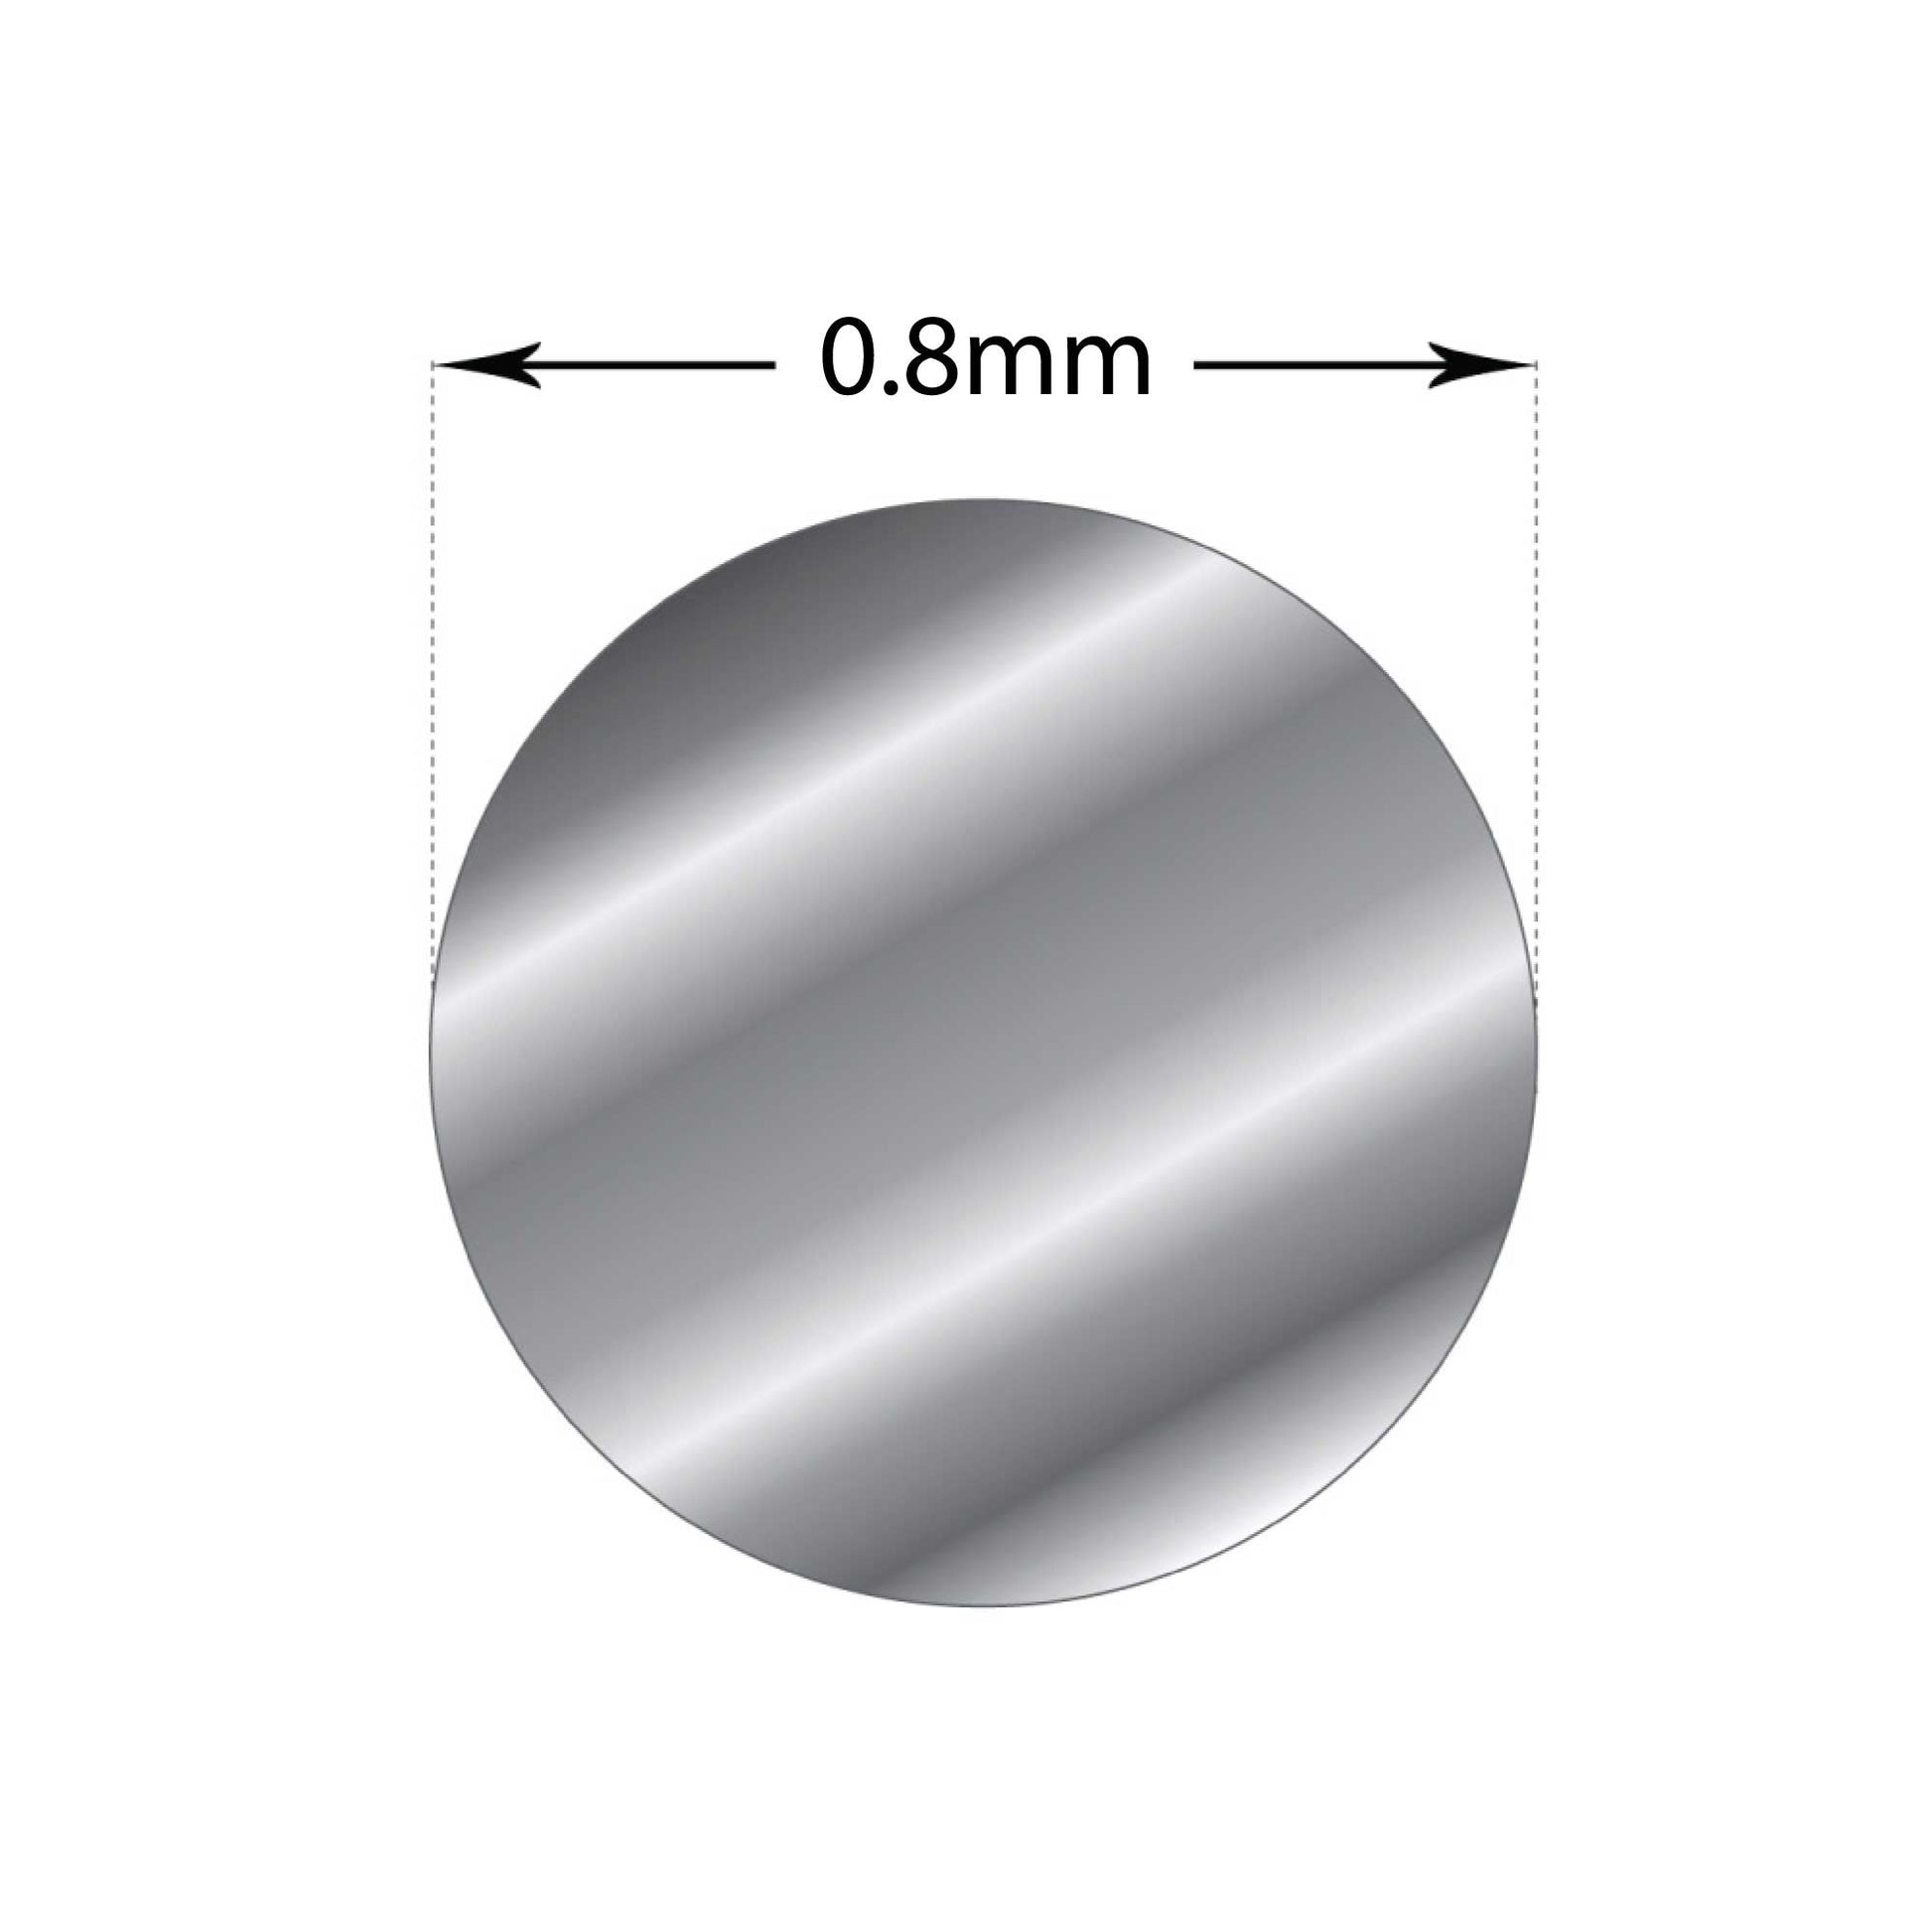 1m Sterling Silver 0.8mm - Soft Round Wire Rod 20 Gauge Jewellery Bead